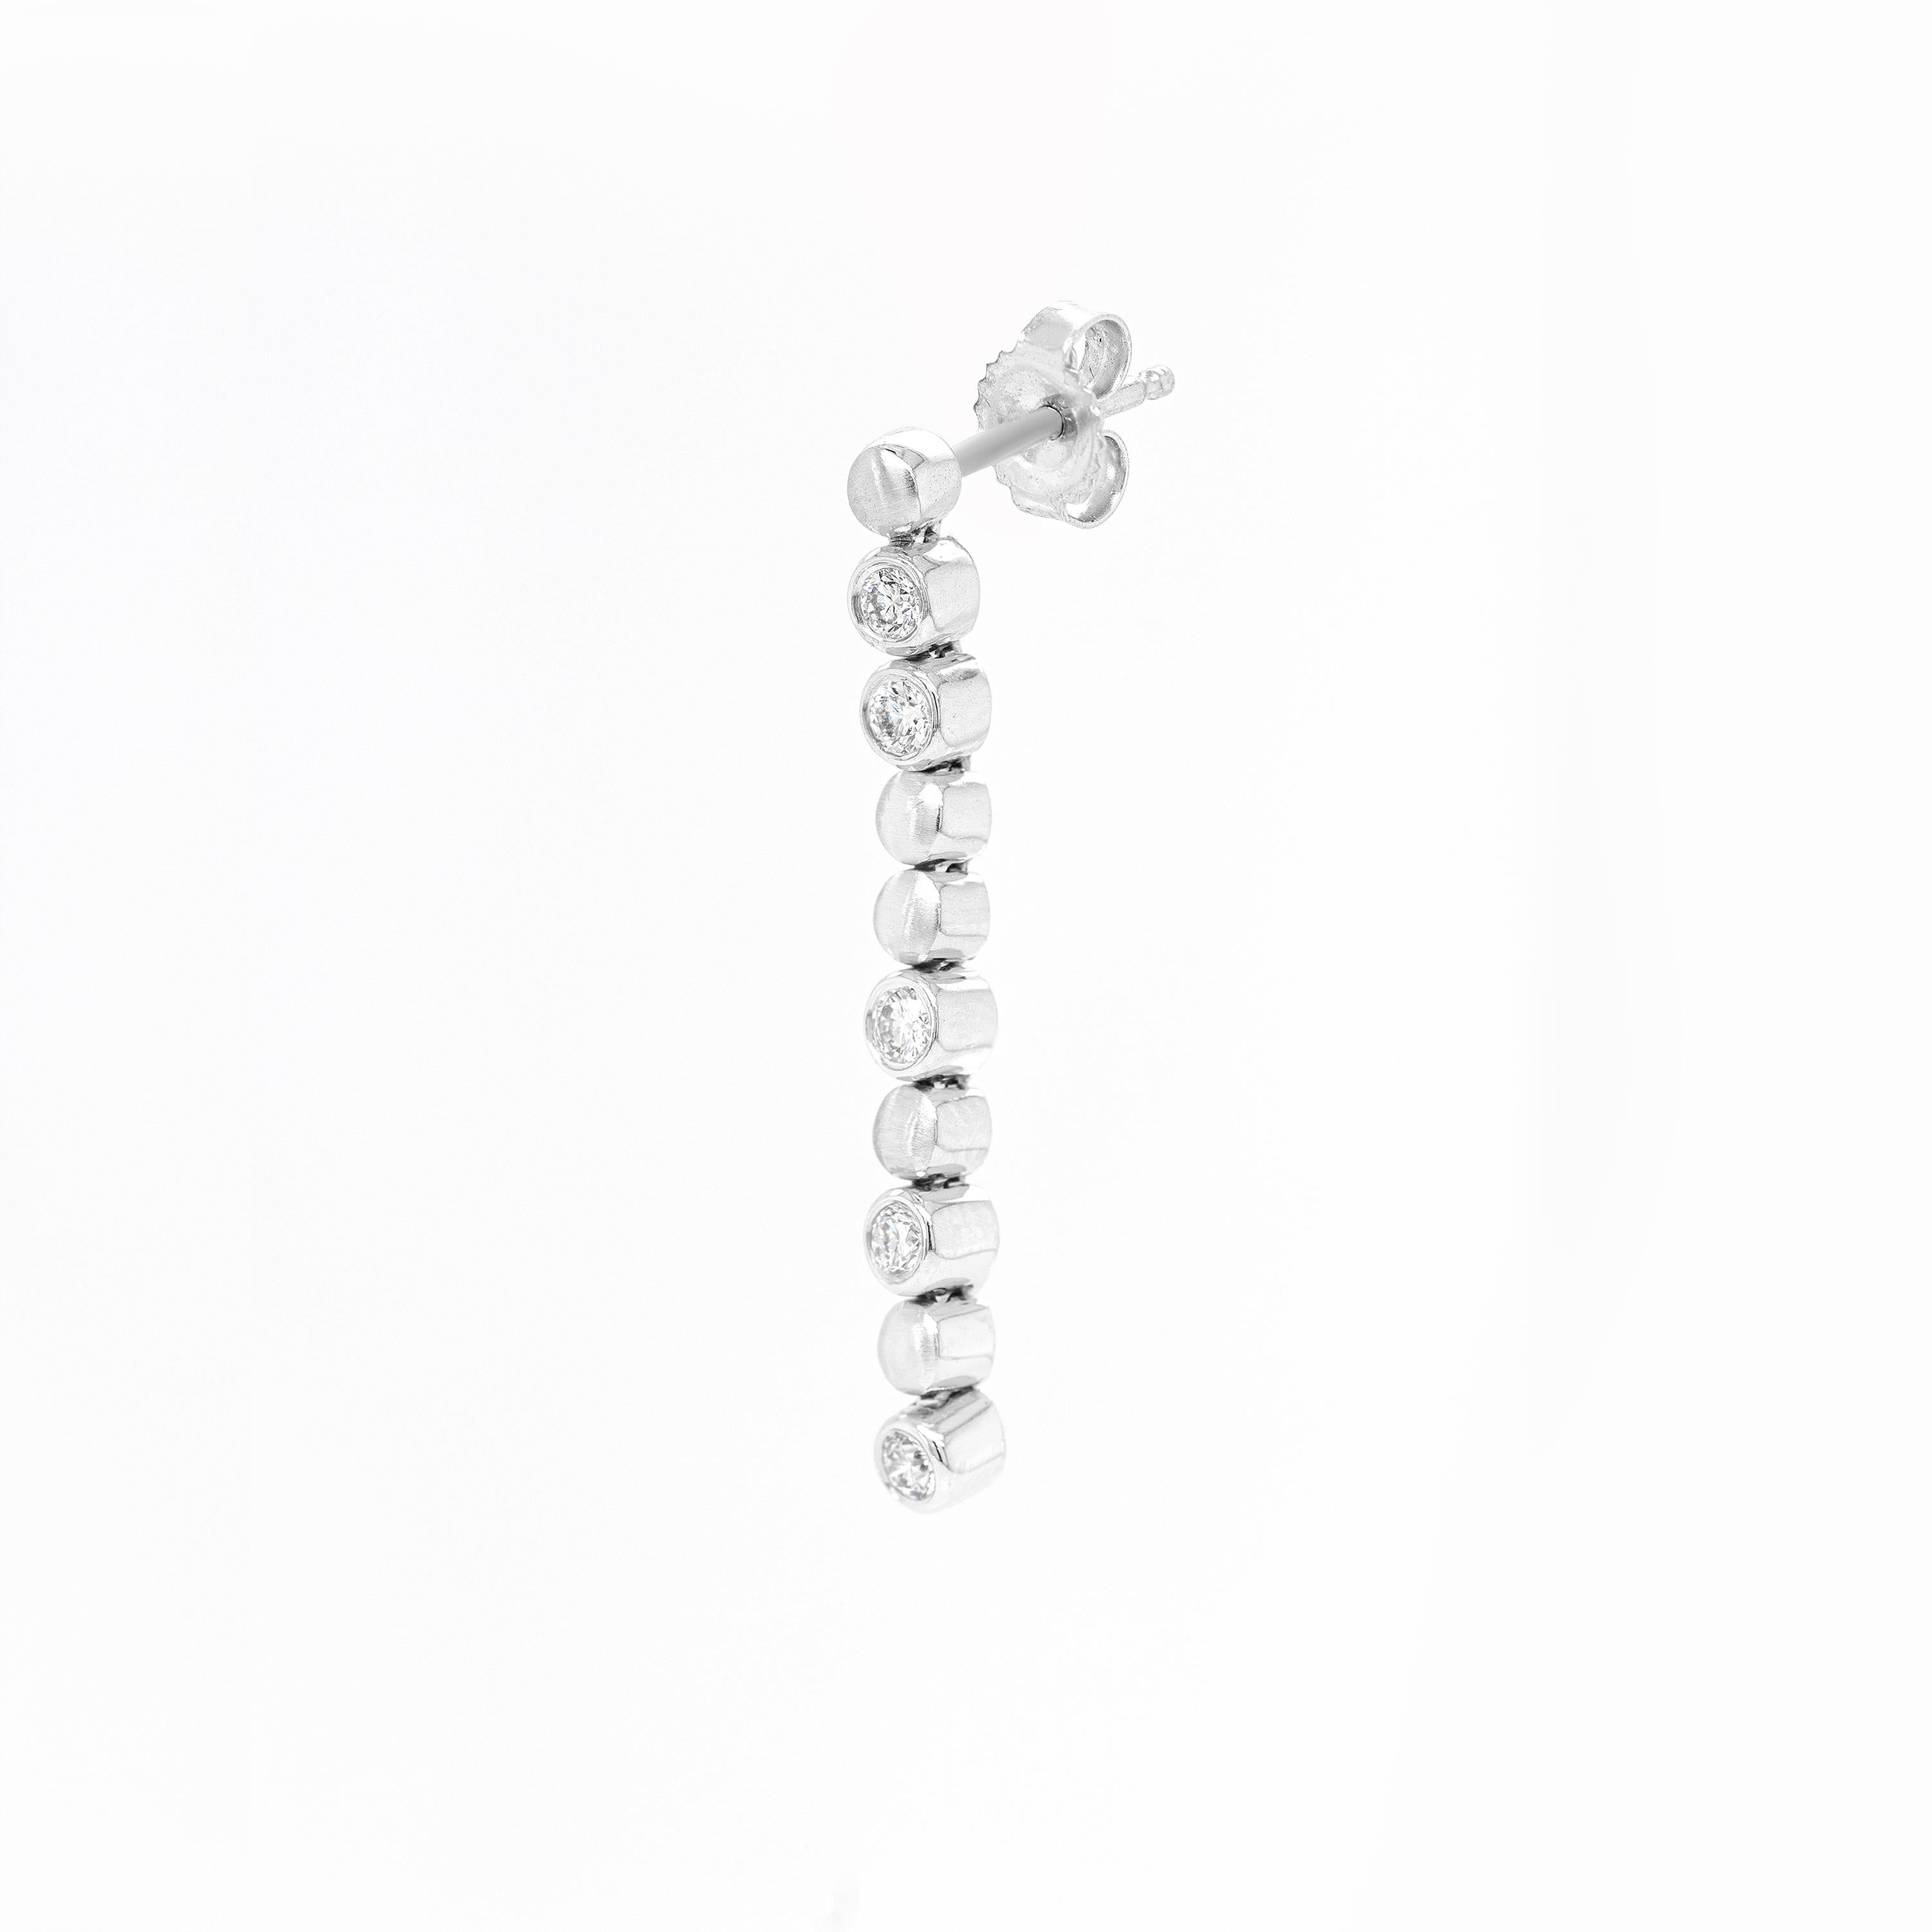 Beautiful and delicate, these linear drop earrings showcase 5 round brilliant cut diamonds, weighing approximately 0.60ct combined, all mounted in 18 carat white gold rub-over, open back settings. The sparkling diamonds alternate with five 18 carat